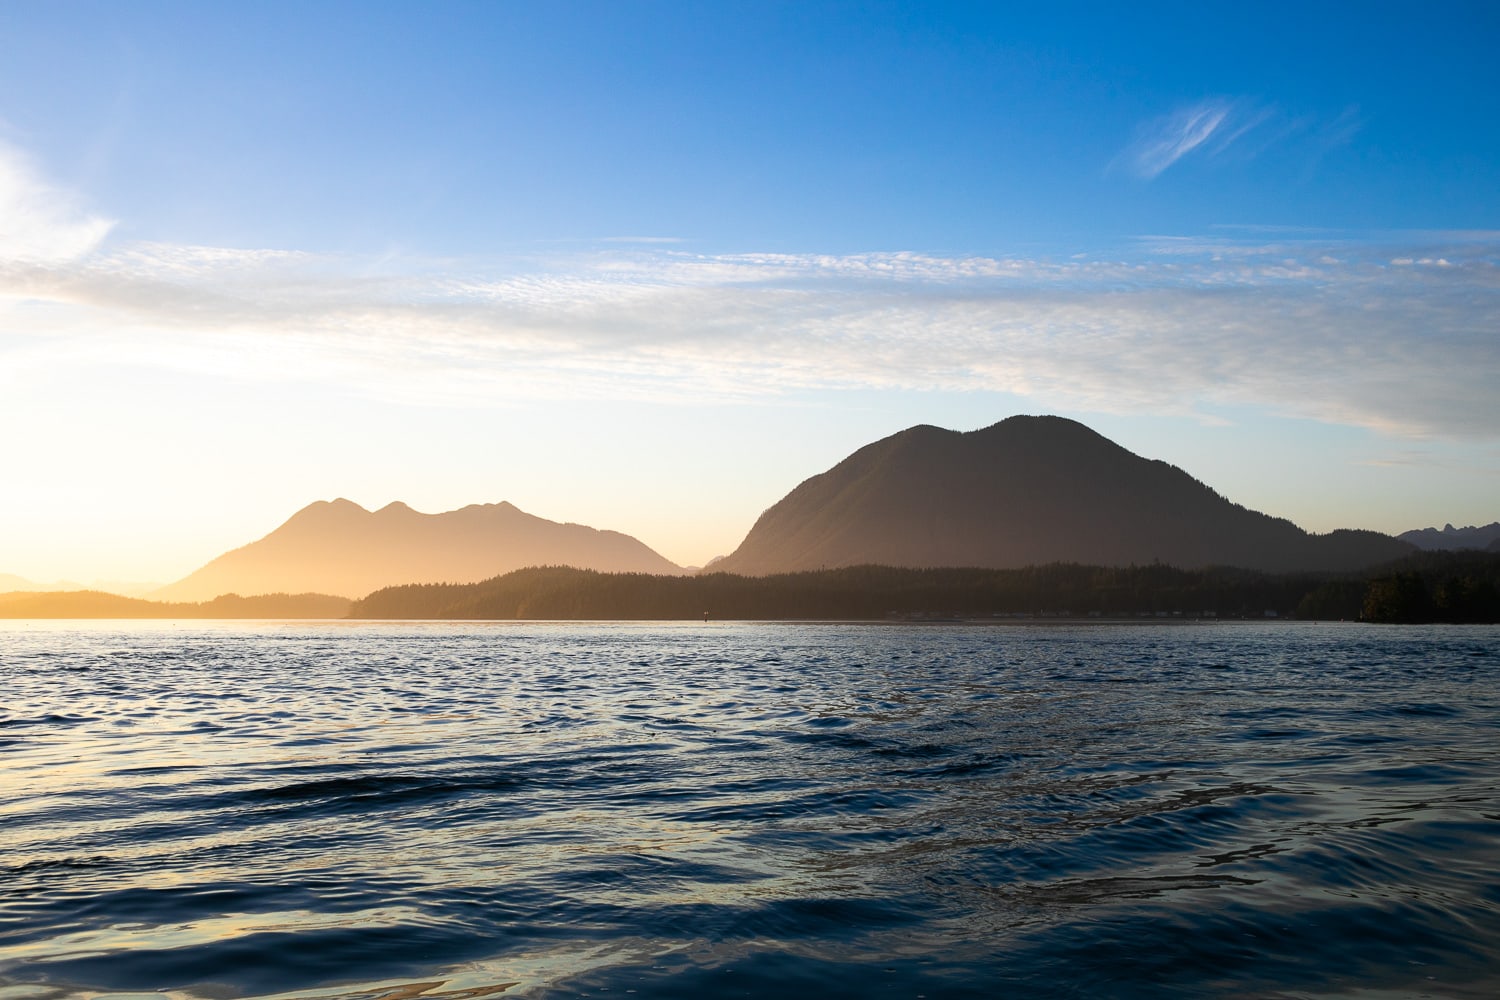 Photo of Clayoquot Sound at sunset. The waters are calm as the sunsets to the left. Treed mountains rise out of the waters and are cast in a golden glow.